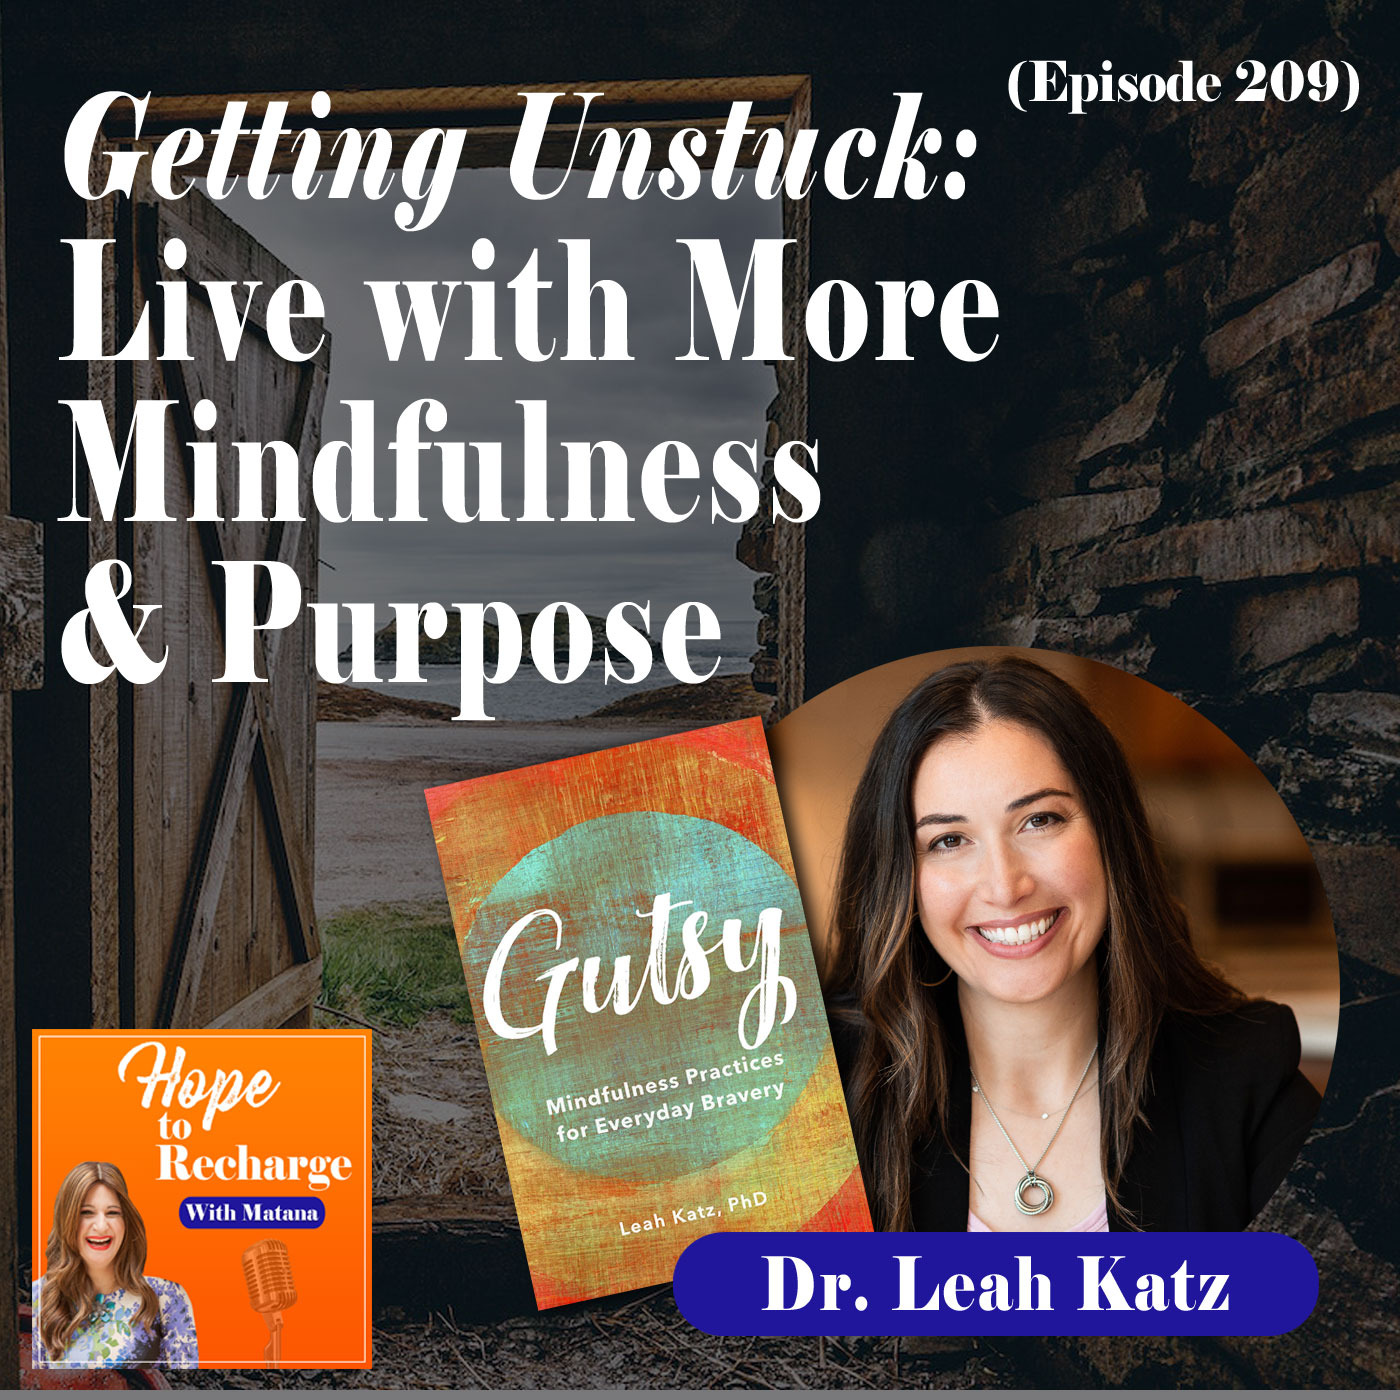 Getting Unstuck: Live with More Mindfulness & Purpose (Dr. Leah Katz)